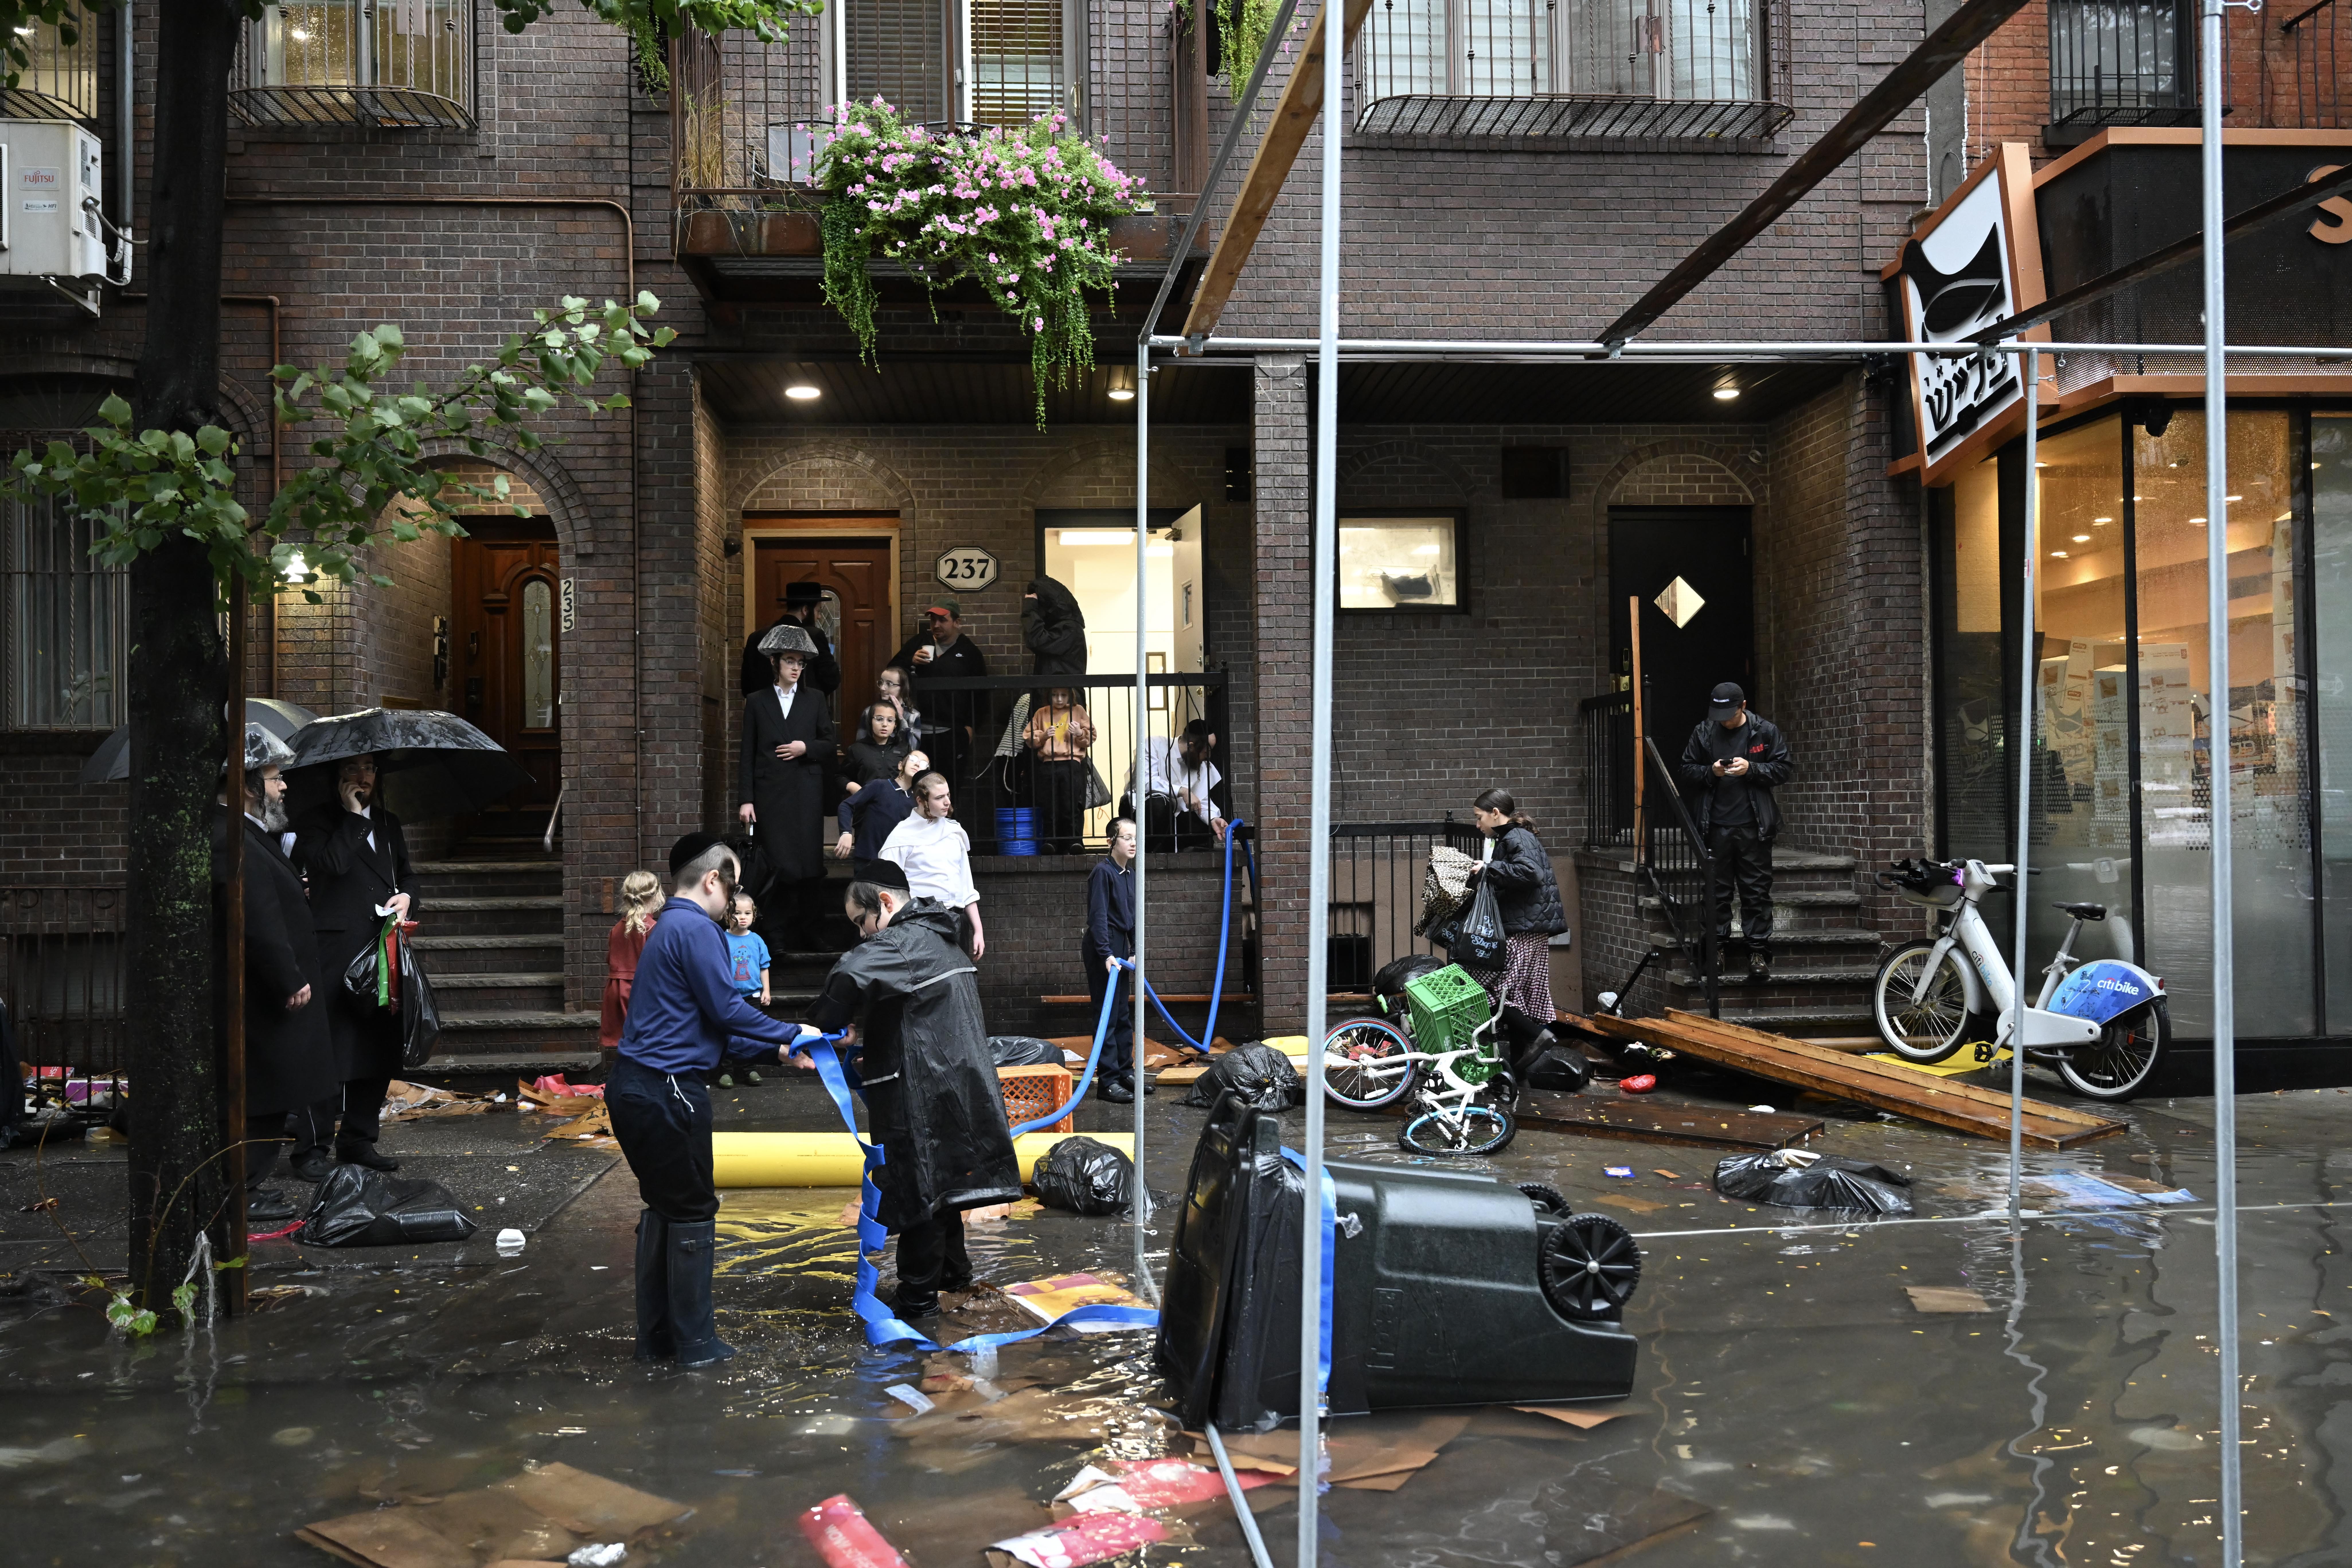 Stunning photos capture how several inches of rain brought New York City to a halt